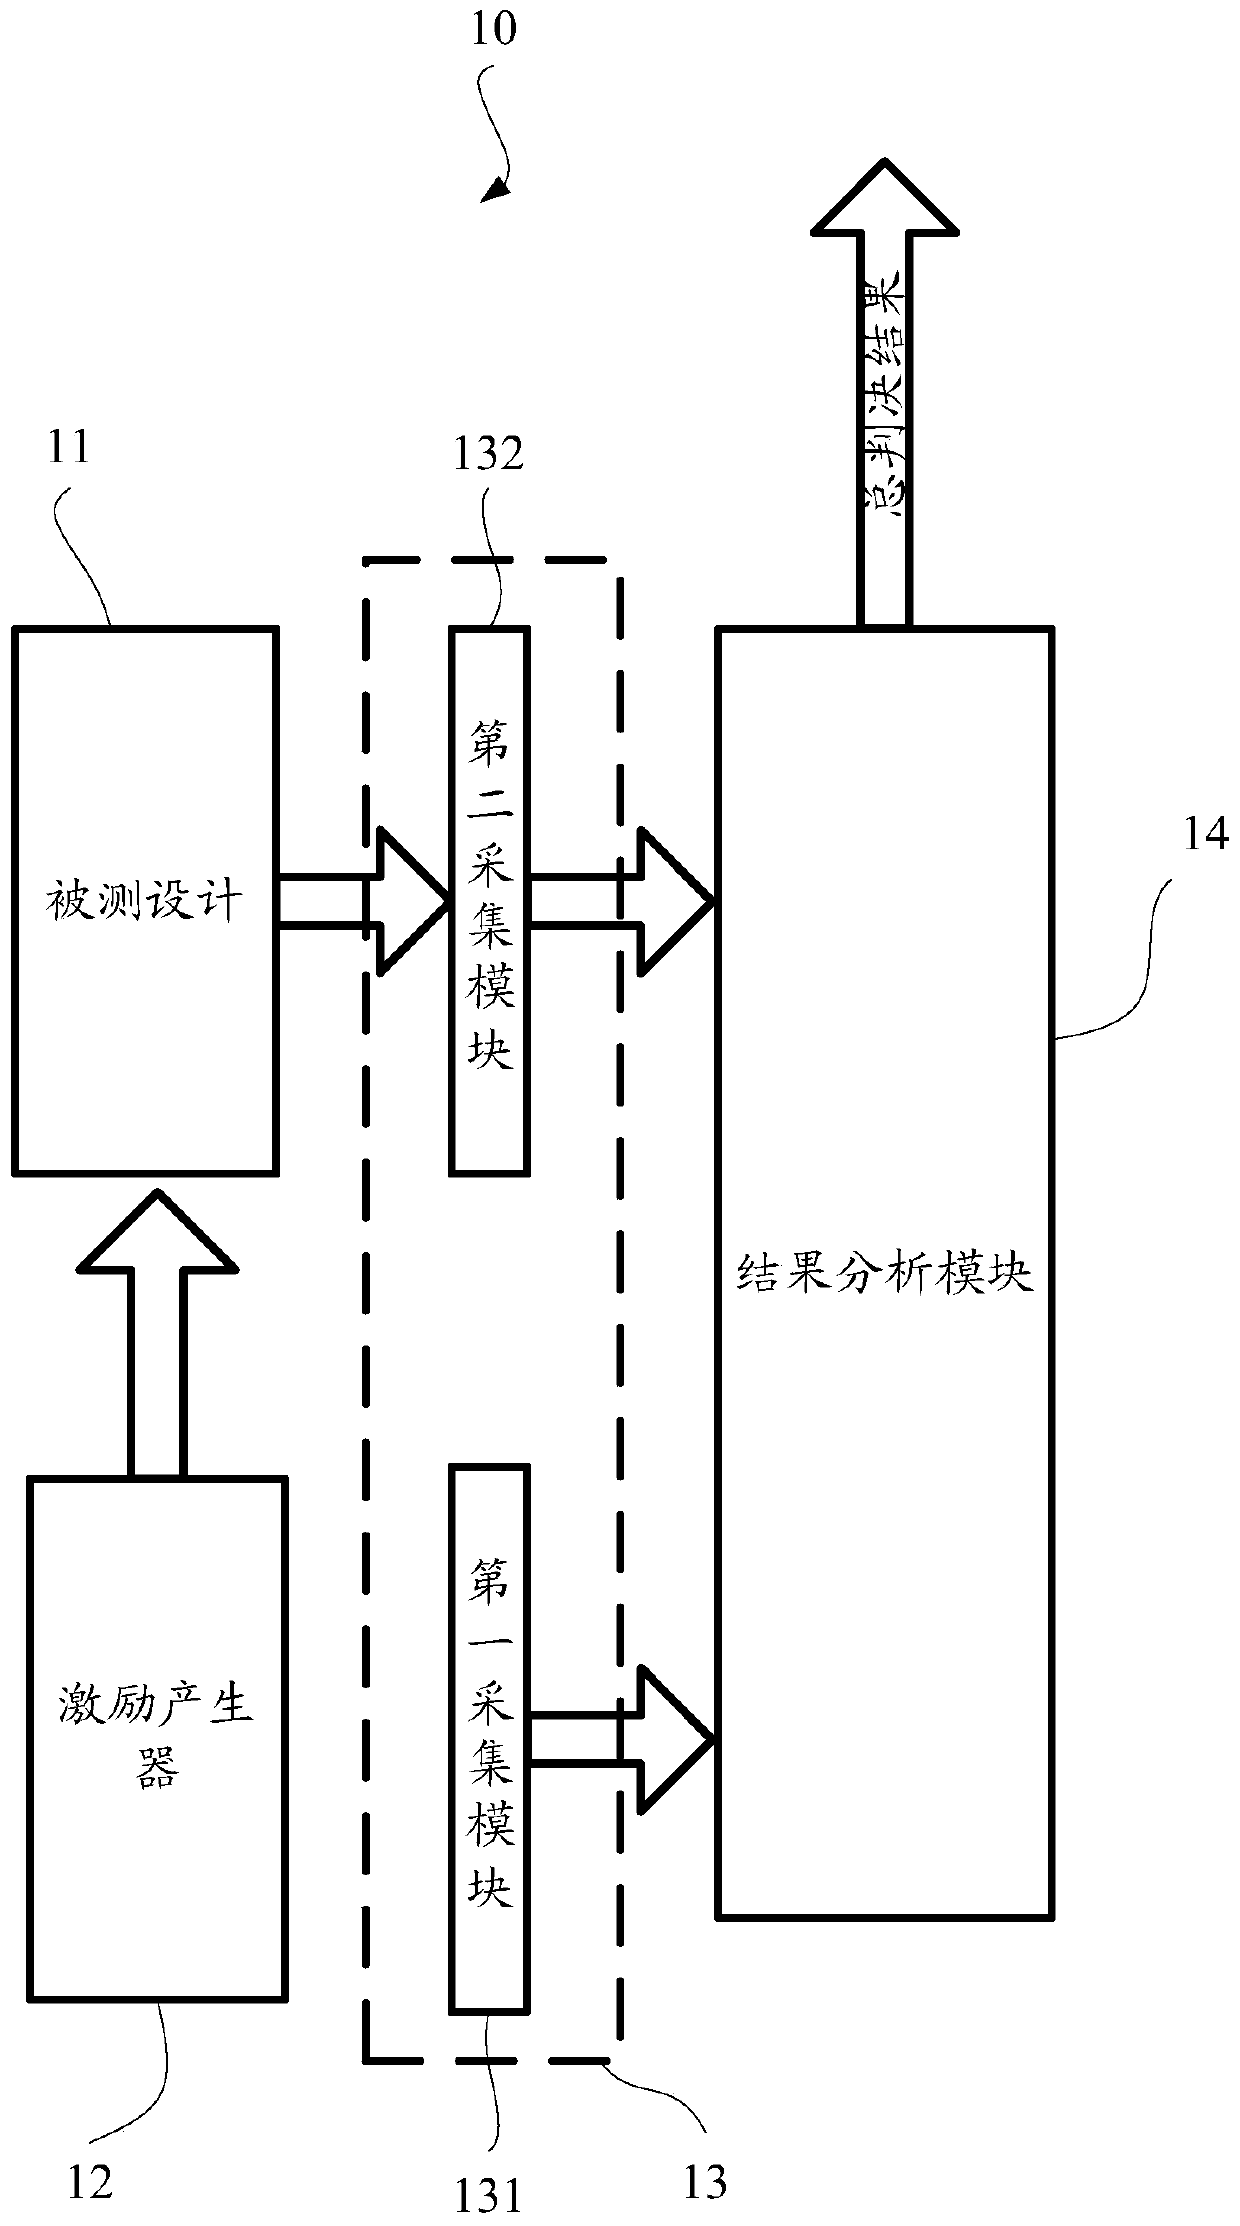 Built-in self-test method and system of FPGA input and output logic module